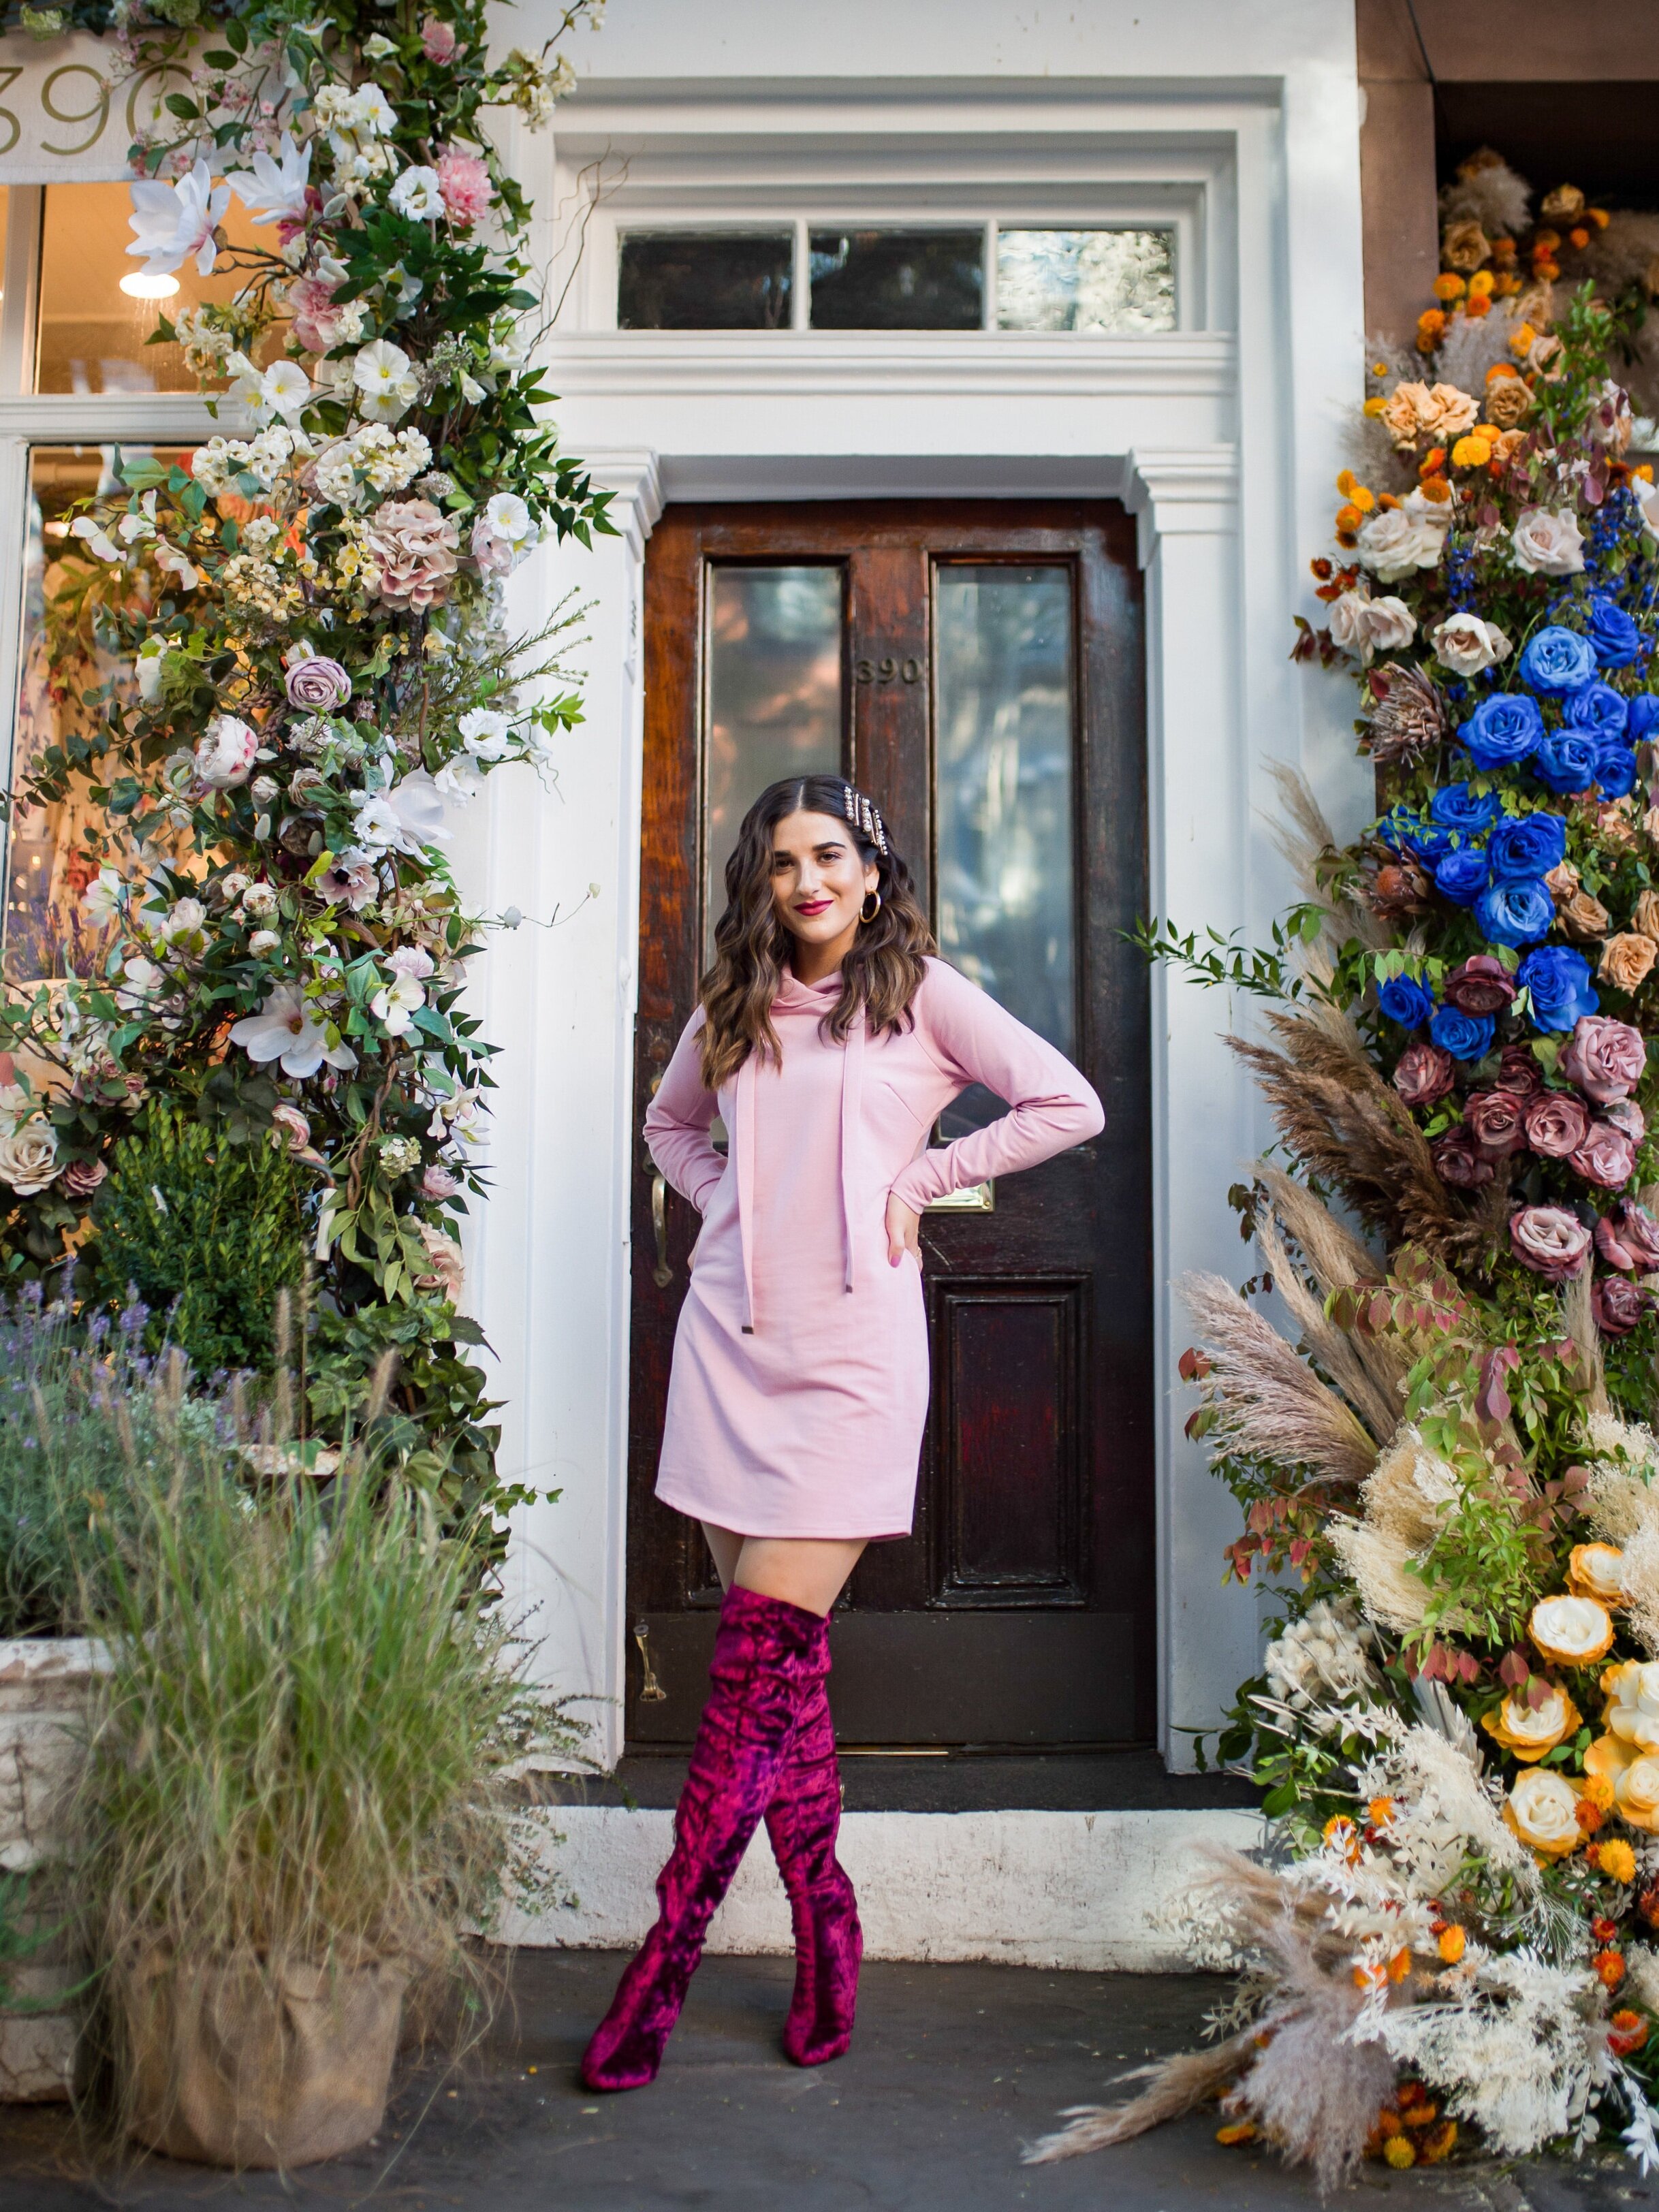 Pink Sweatshirt Dress Velvet OTK Boots Walmart Fashion Esther Santer Fashion Blog NYC Street Style Blogger Outfit OOTD Trendy Shopping Girl What How To Wear Hair Accessories Jewel Clips Fall Winter Styling Affordable Maroon Shoes Floral Backdrop  Sale.jpg